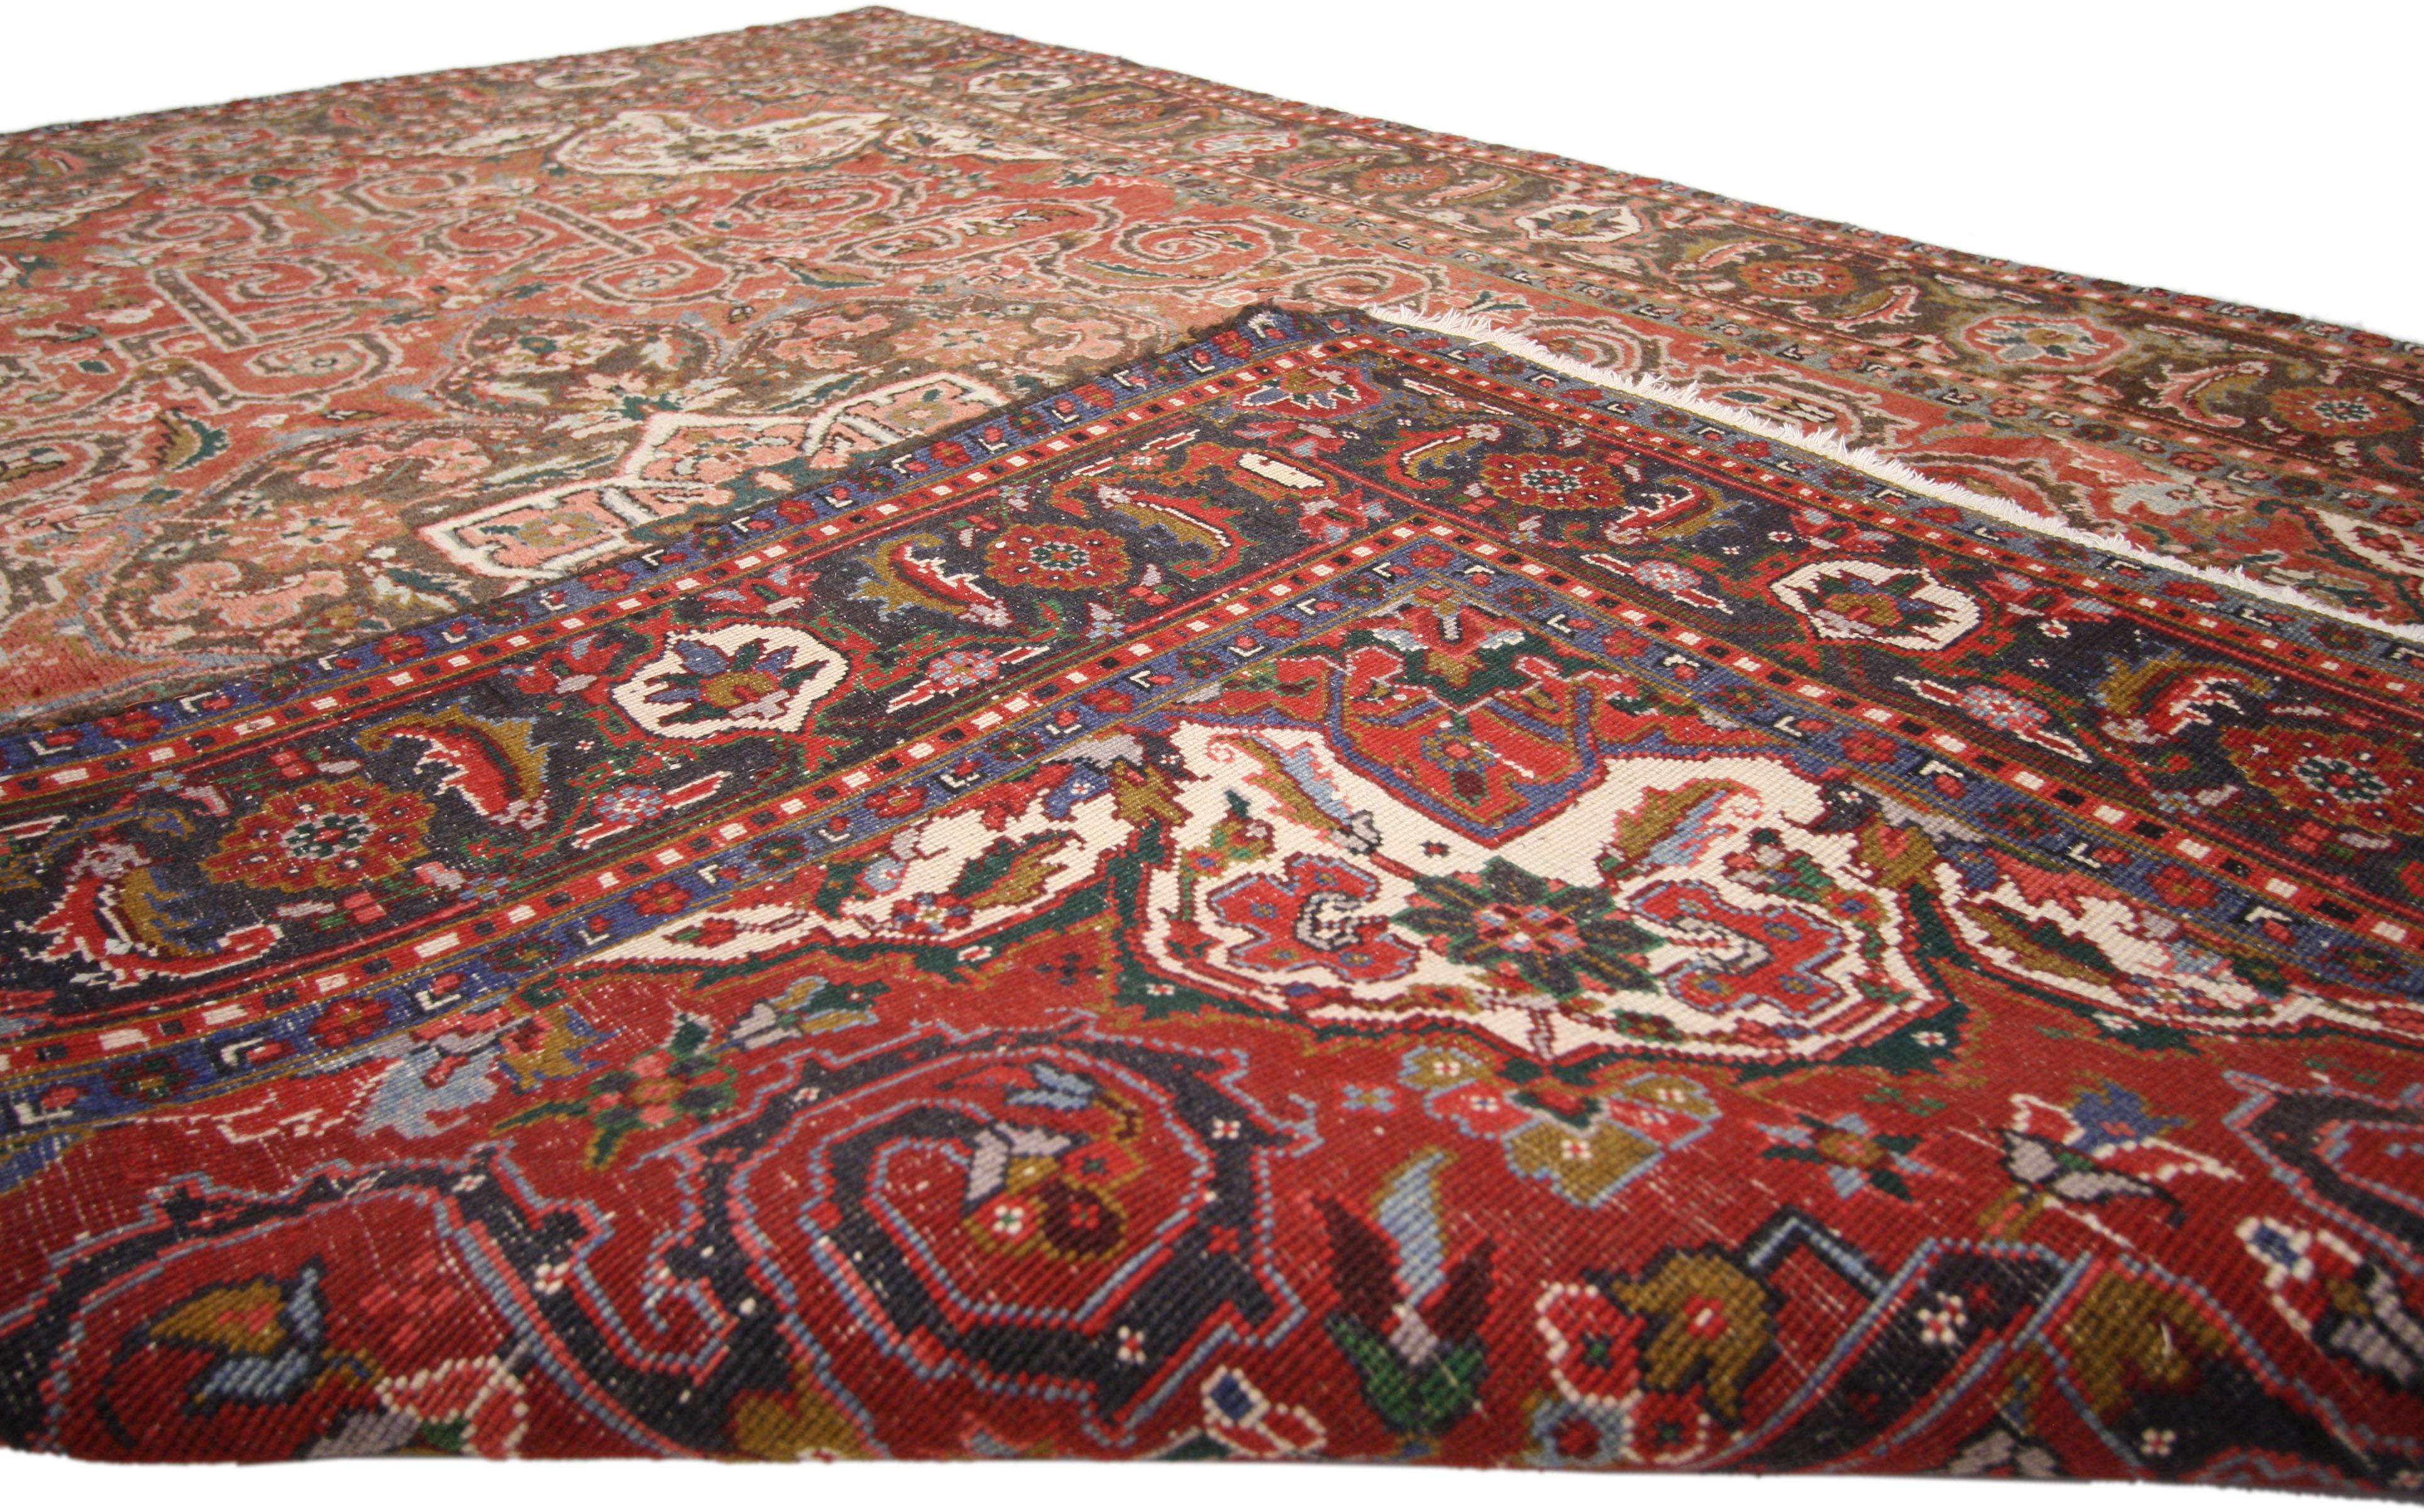 Hand-Knotted Vintage Persian Heriz Rug with Mid-Century Modern English Tudor Cottage Style For Sale